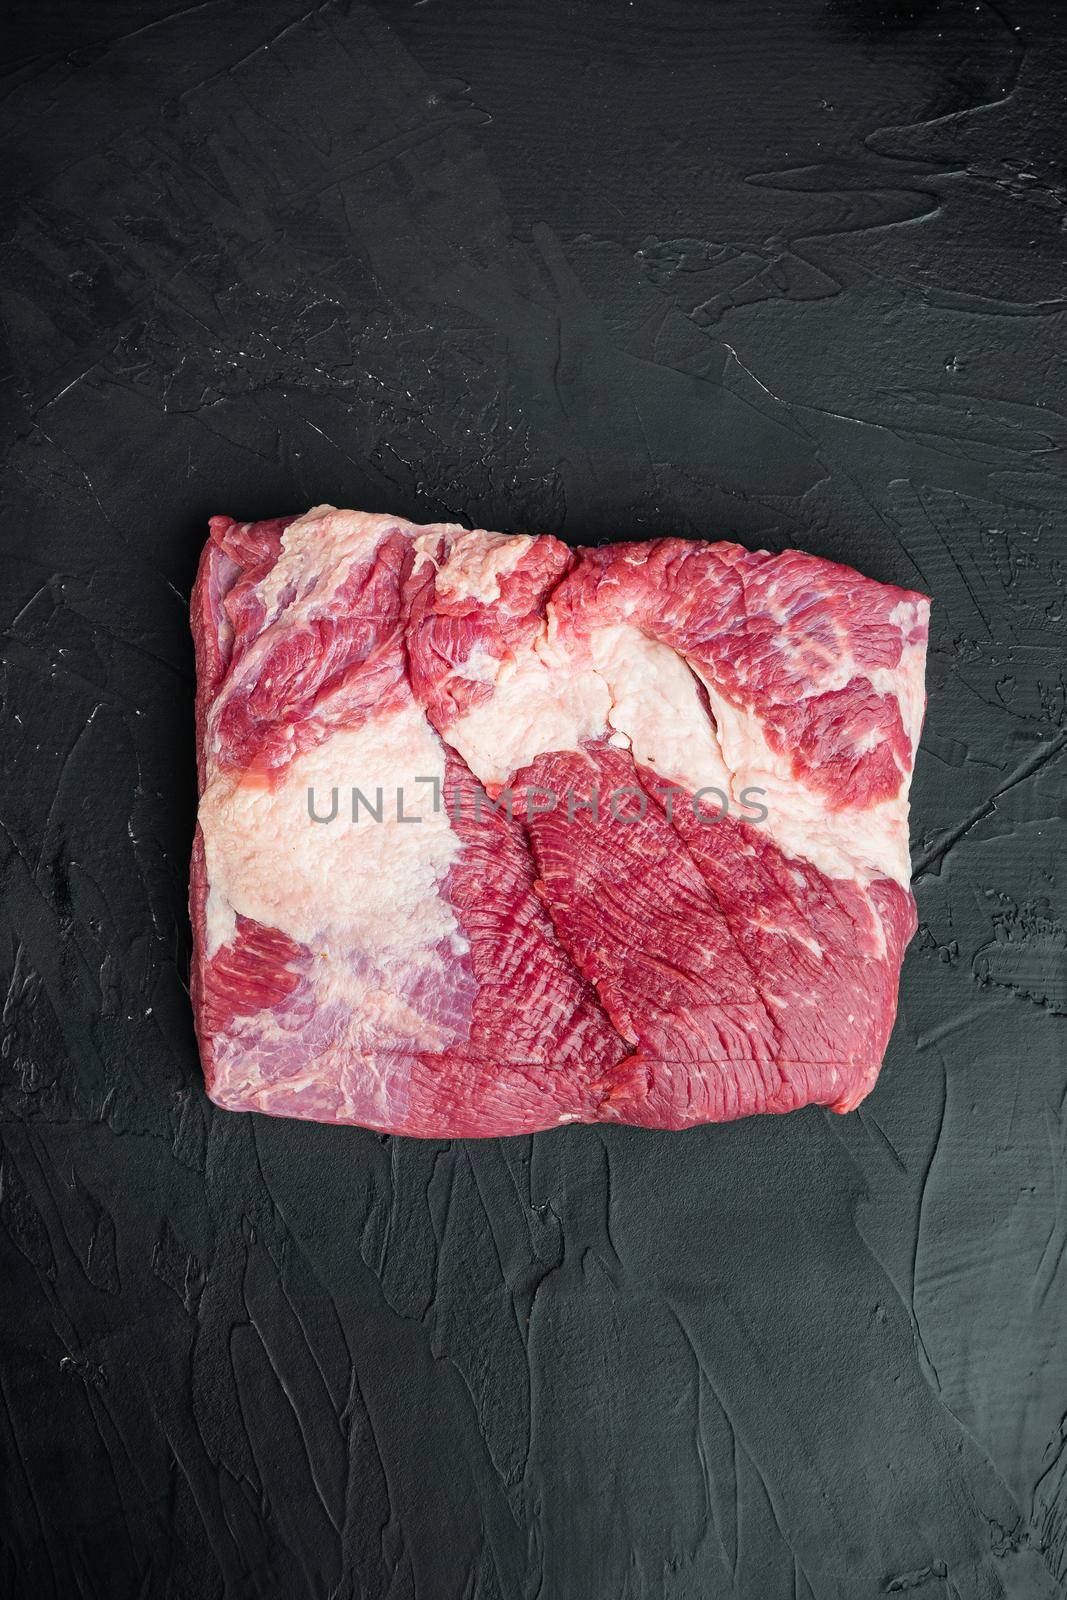 Raw Beef belly, beef brisket meat, on black stone background, top view flat lay, with copy space for text by Ilianesolenyi